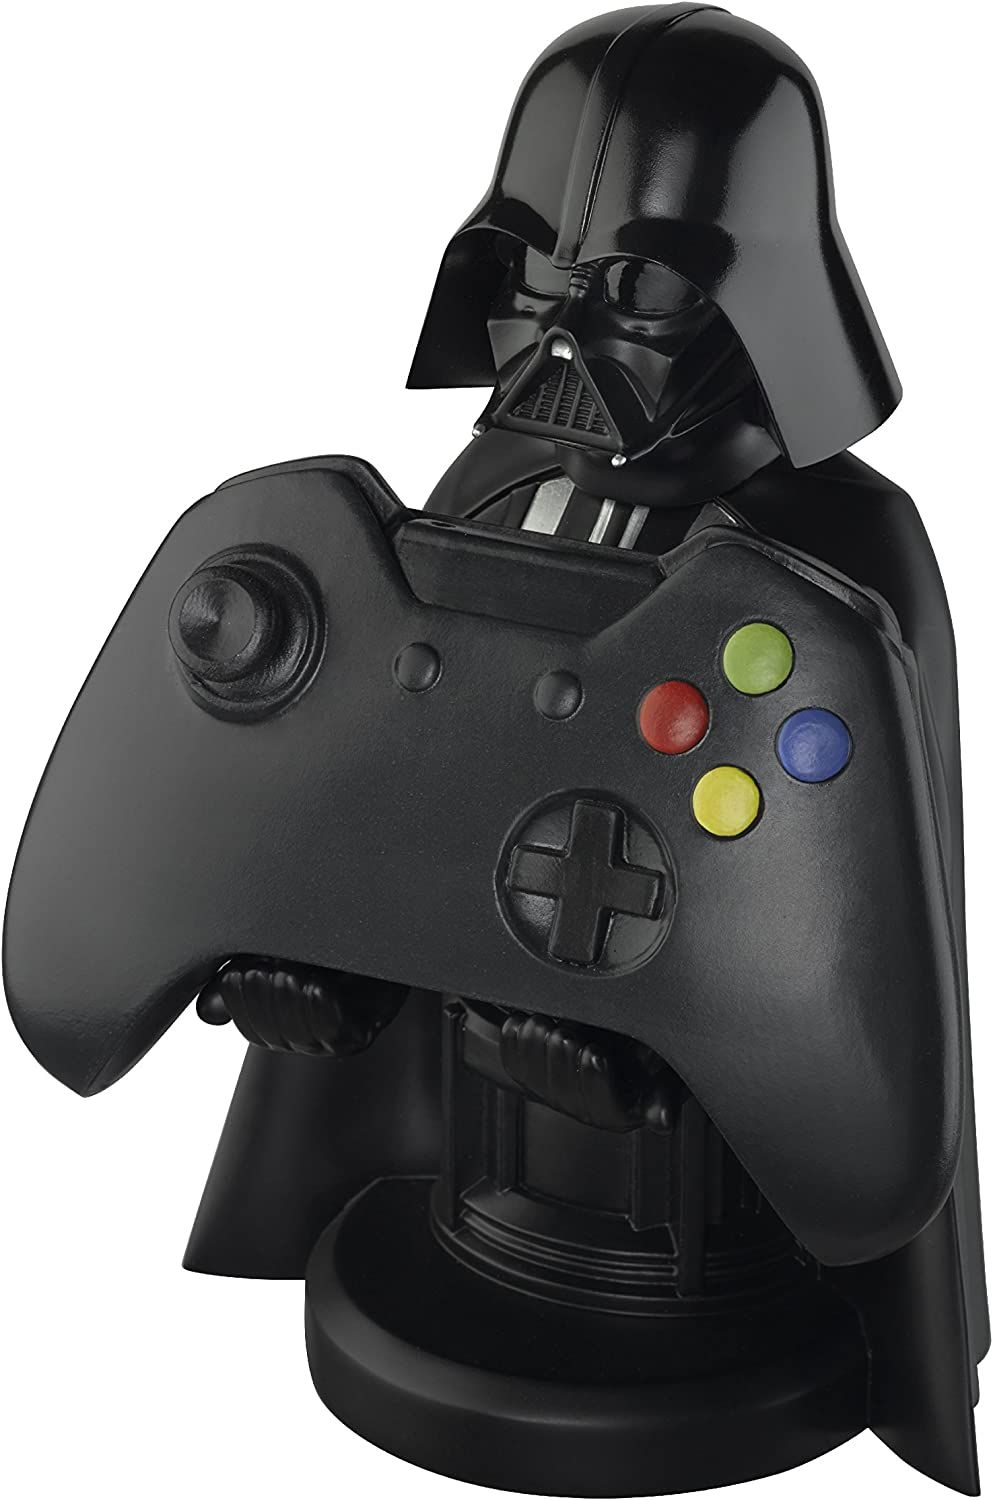 Cable Guy Darth Vader Controller and Device Holder